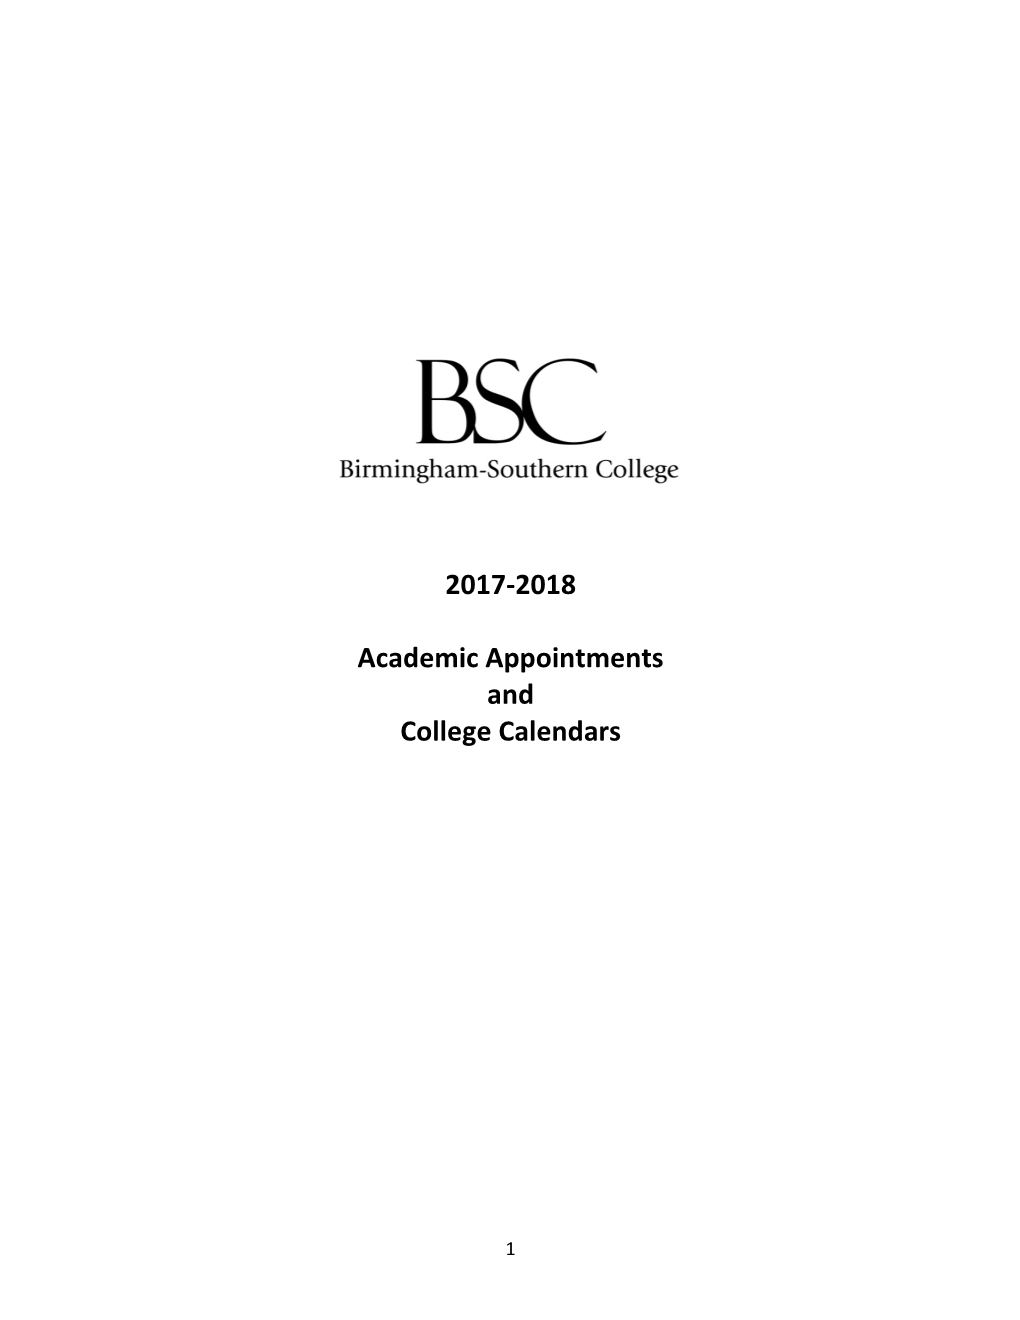 2017-2018 Academic Appointments and College Calendars